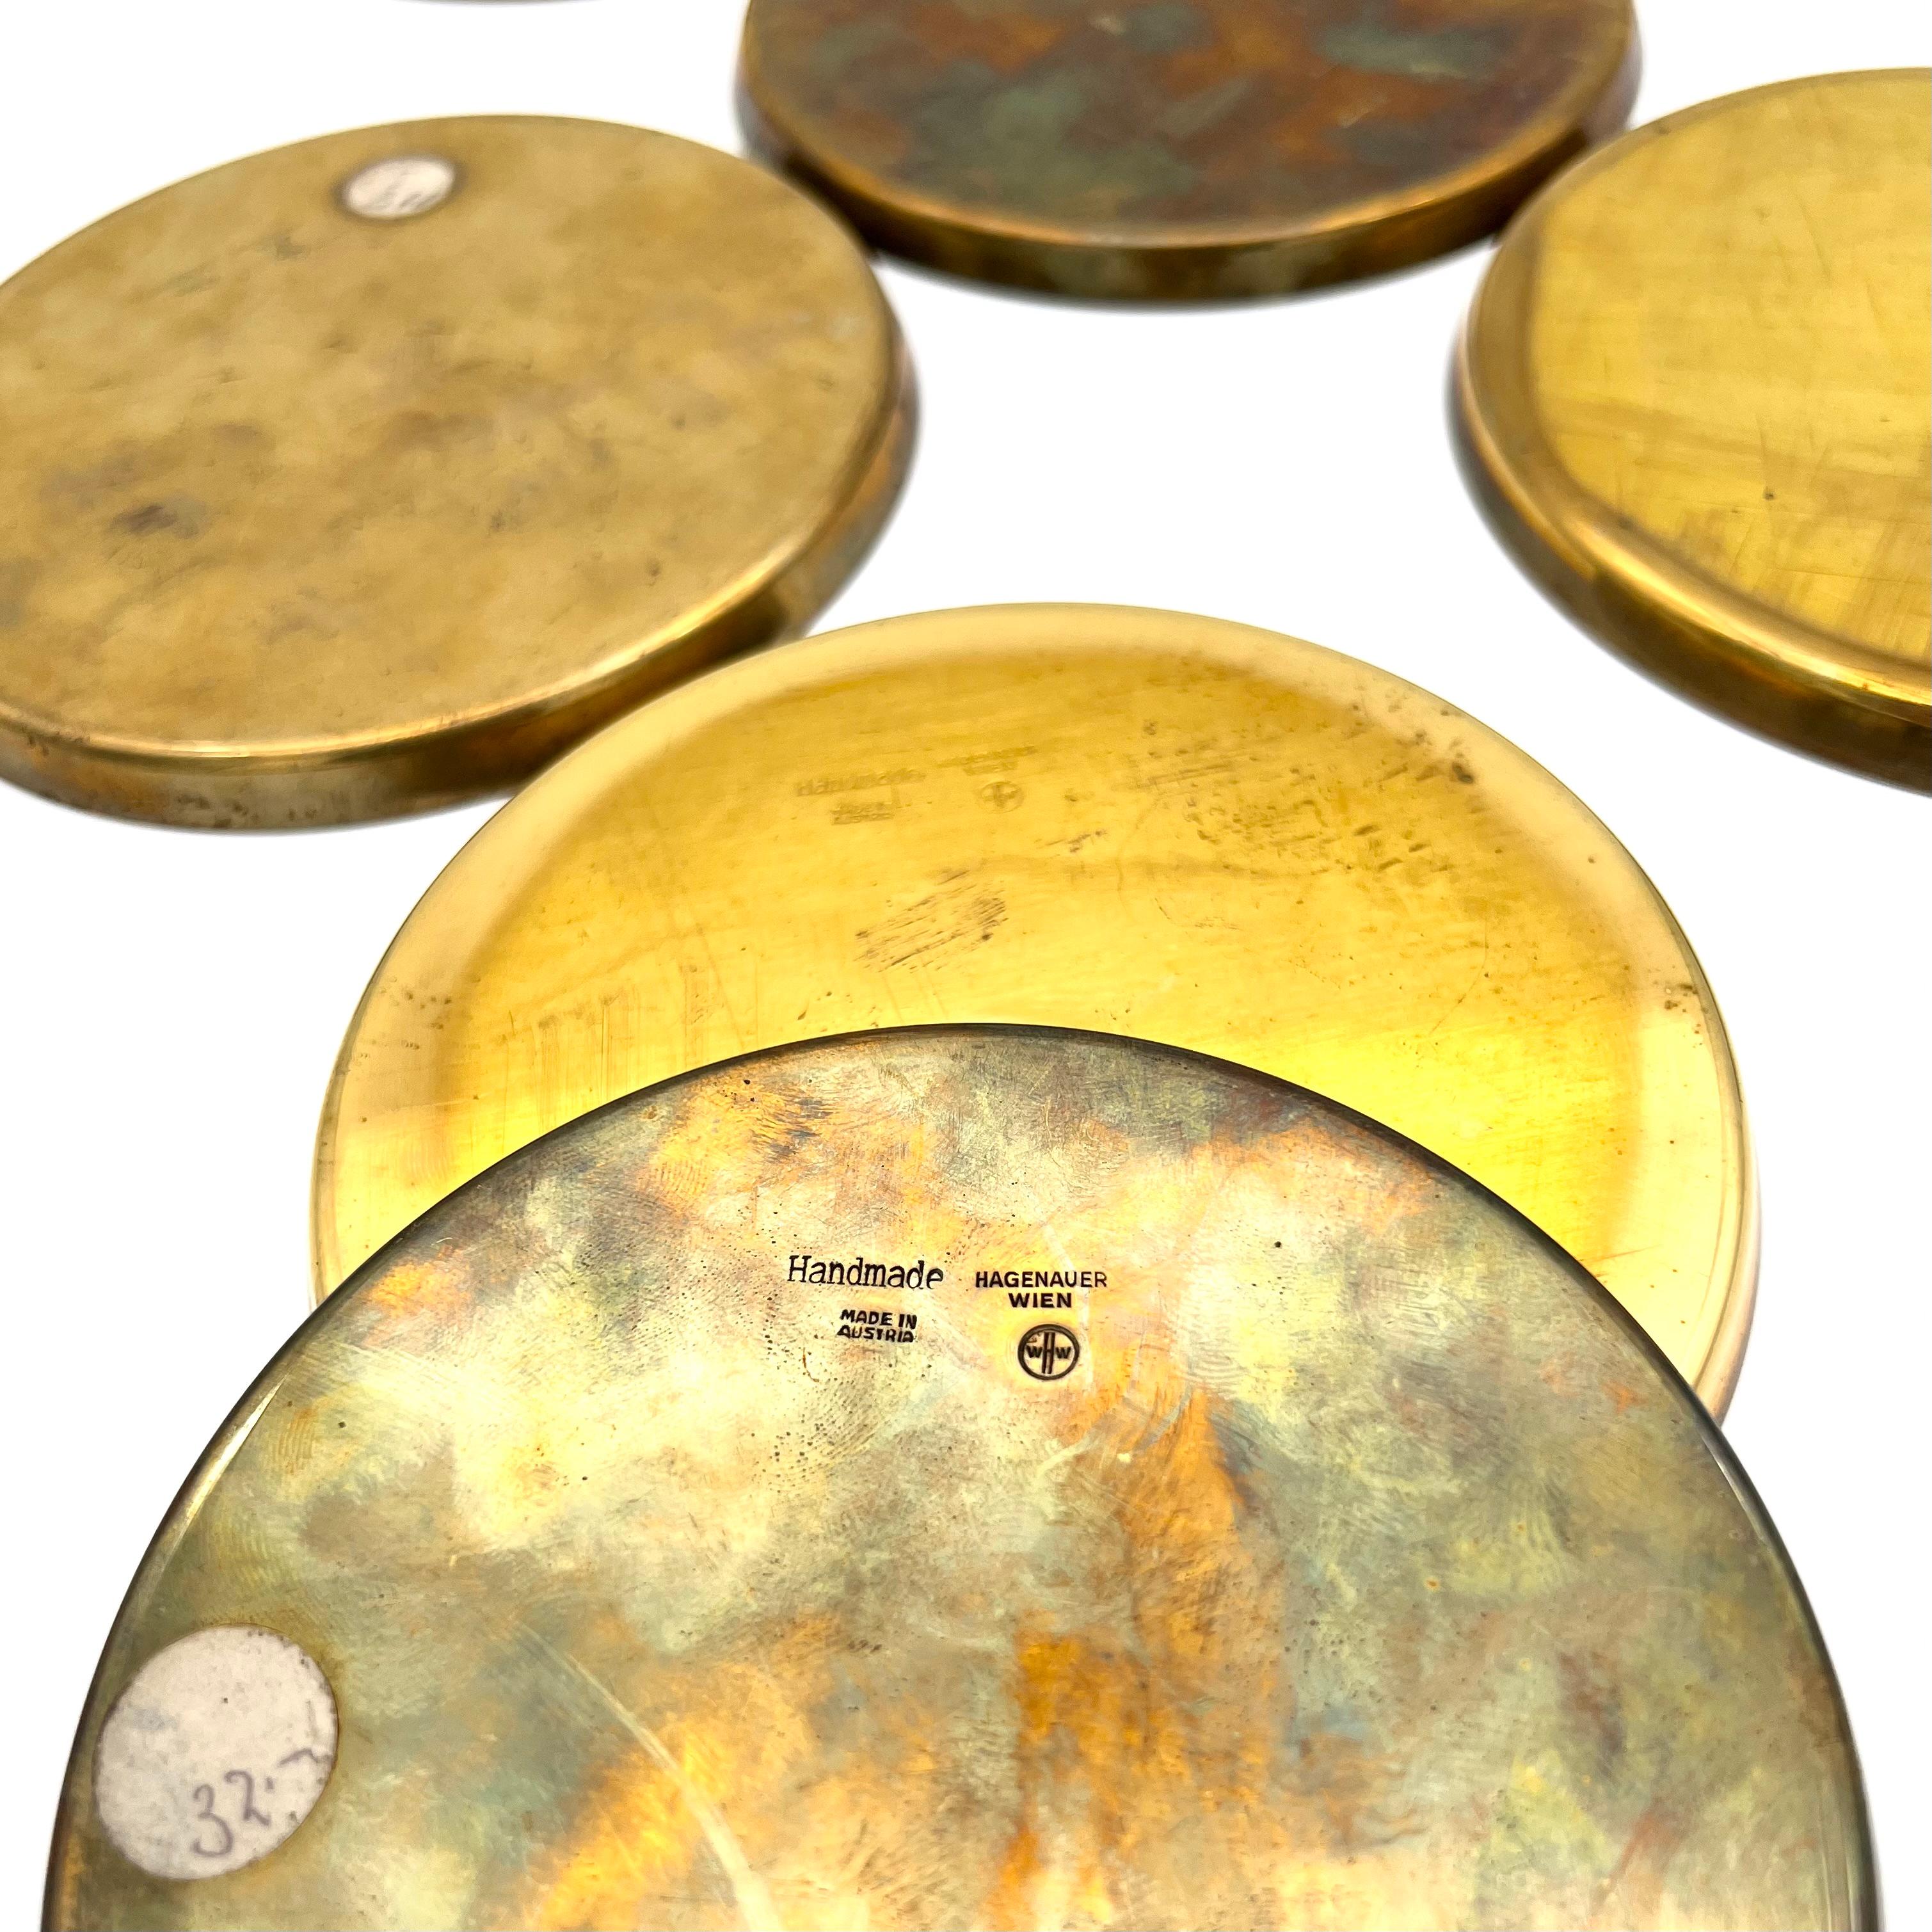 6 brass coasters by Hagenauer, 1950s, the surface is a bit brassing but they are in good condition.